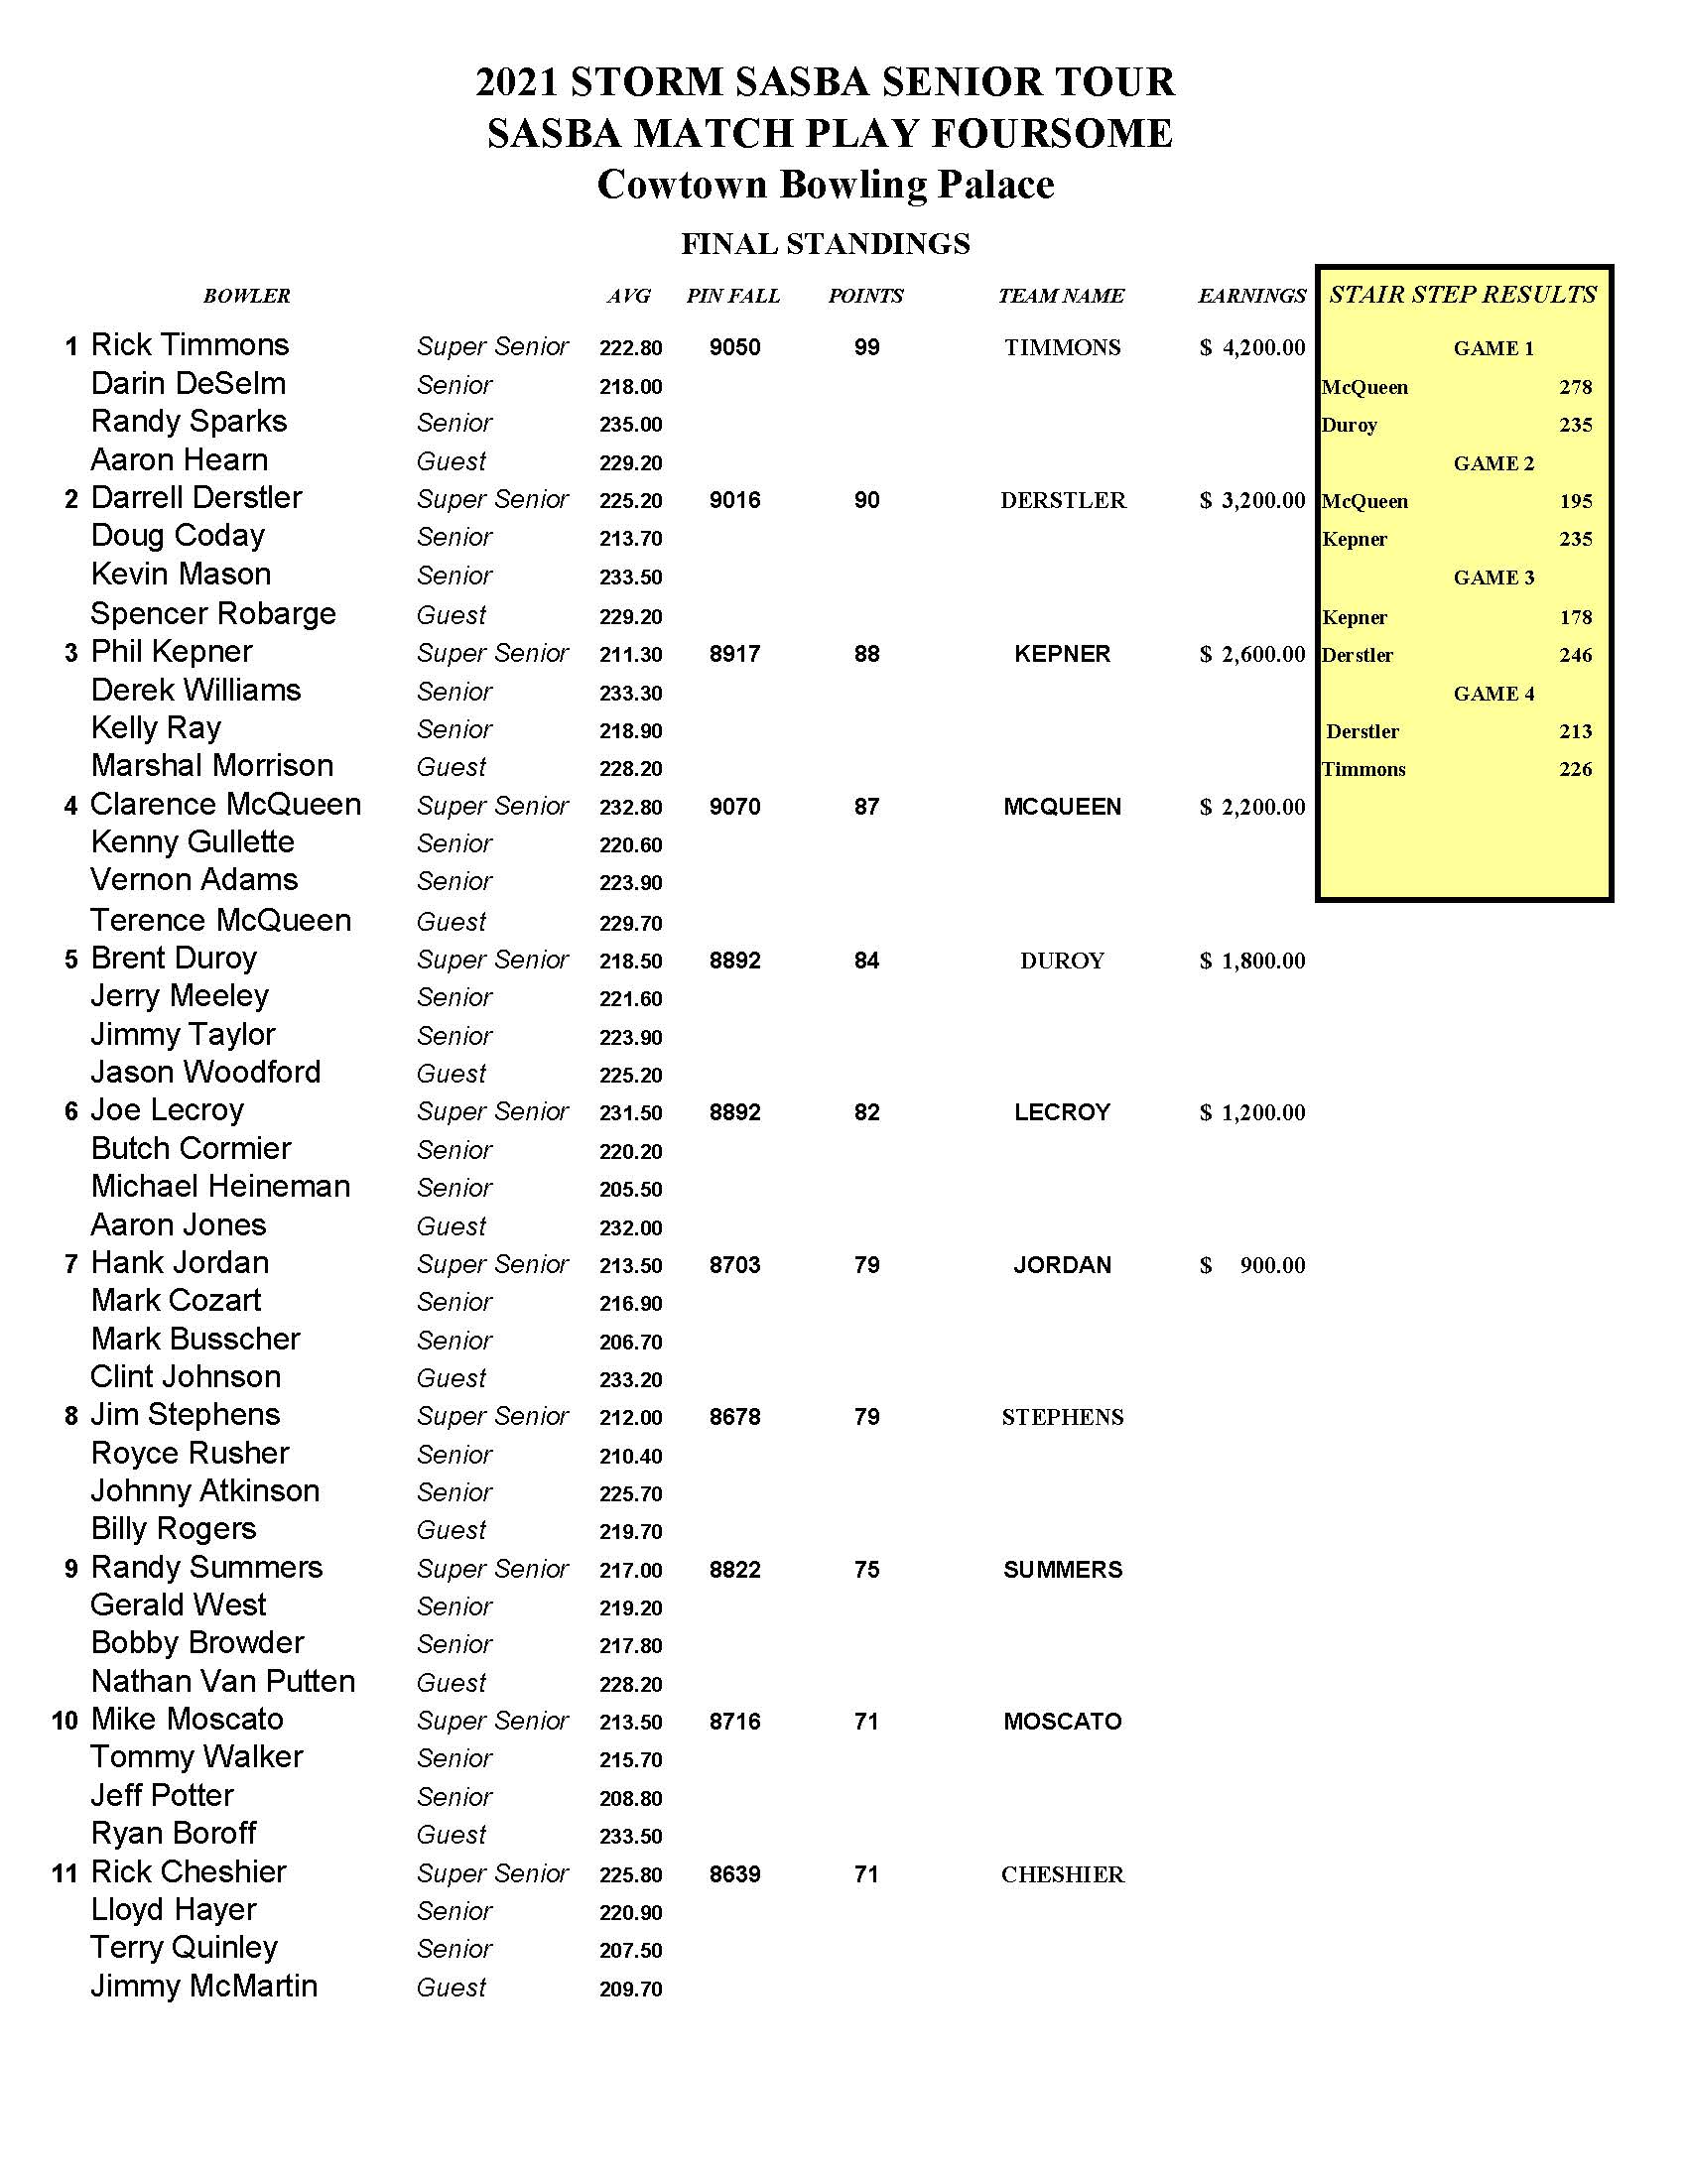 08222021results_Page_1